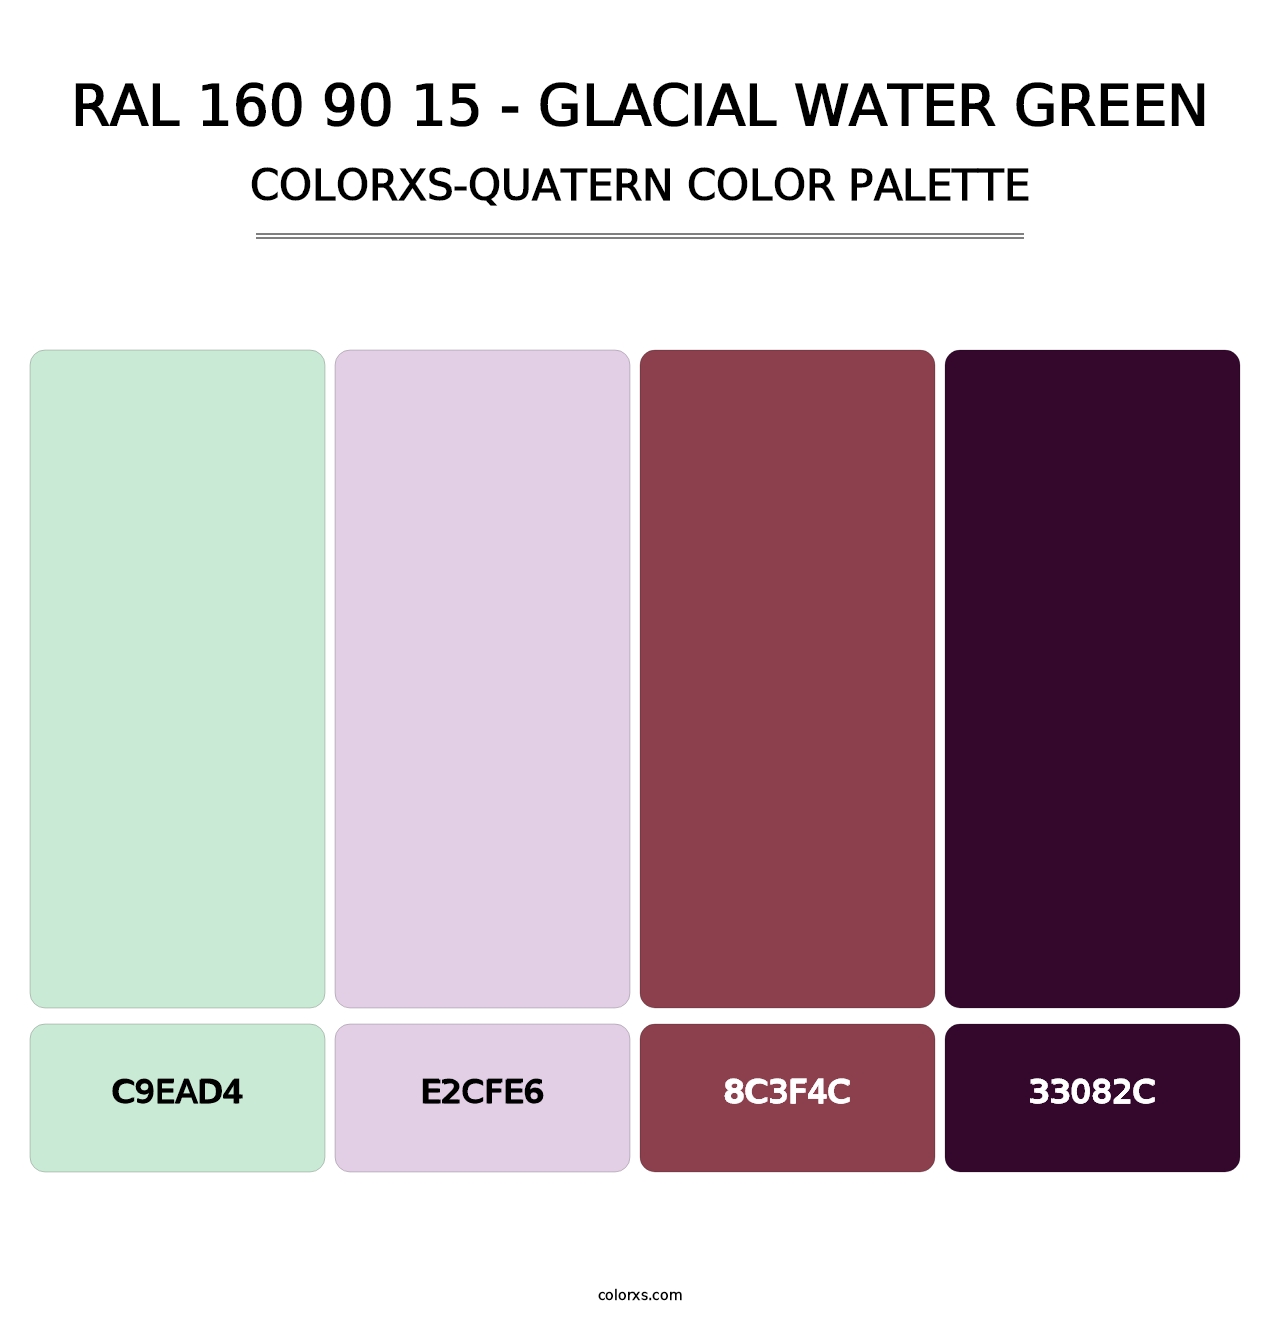 RAL 160 90 15 - Glacial Water Green - Colorxs Quatern Palette